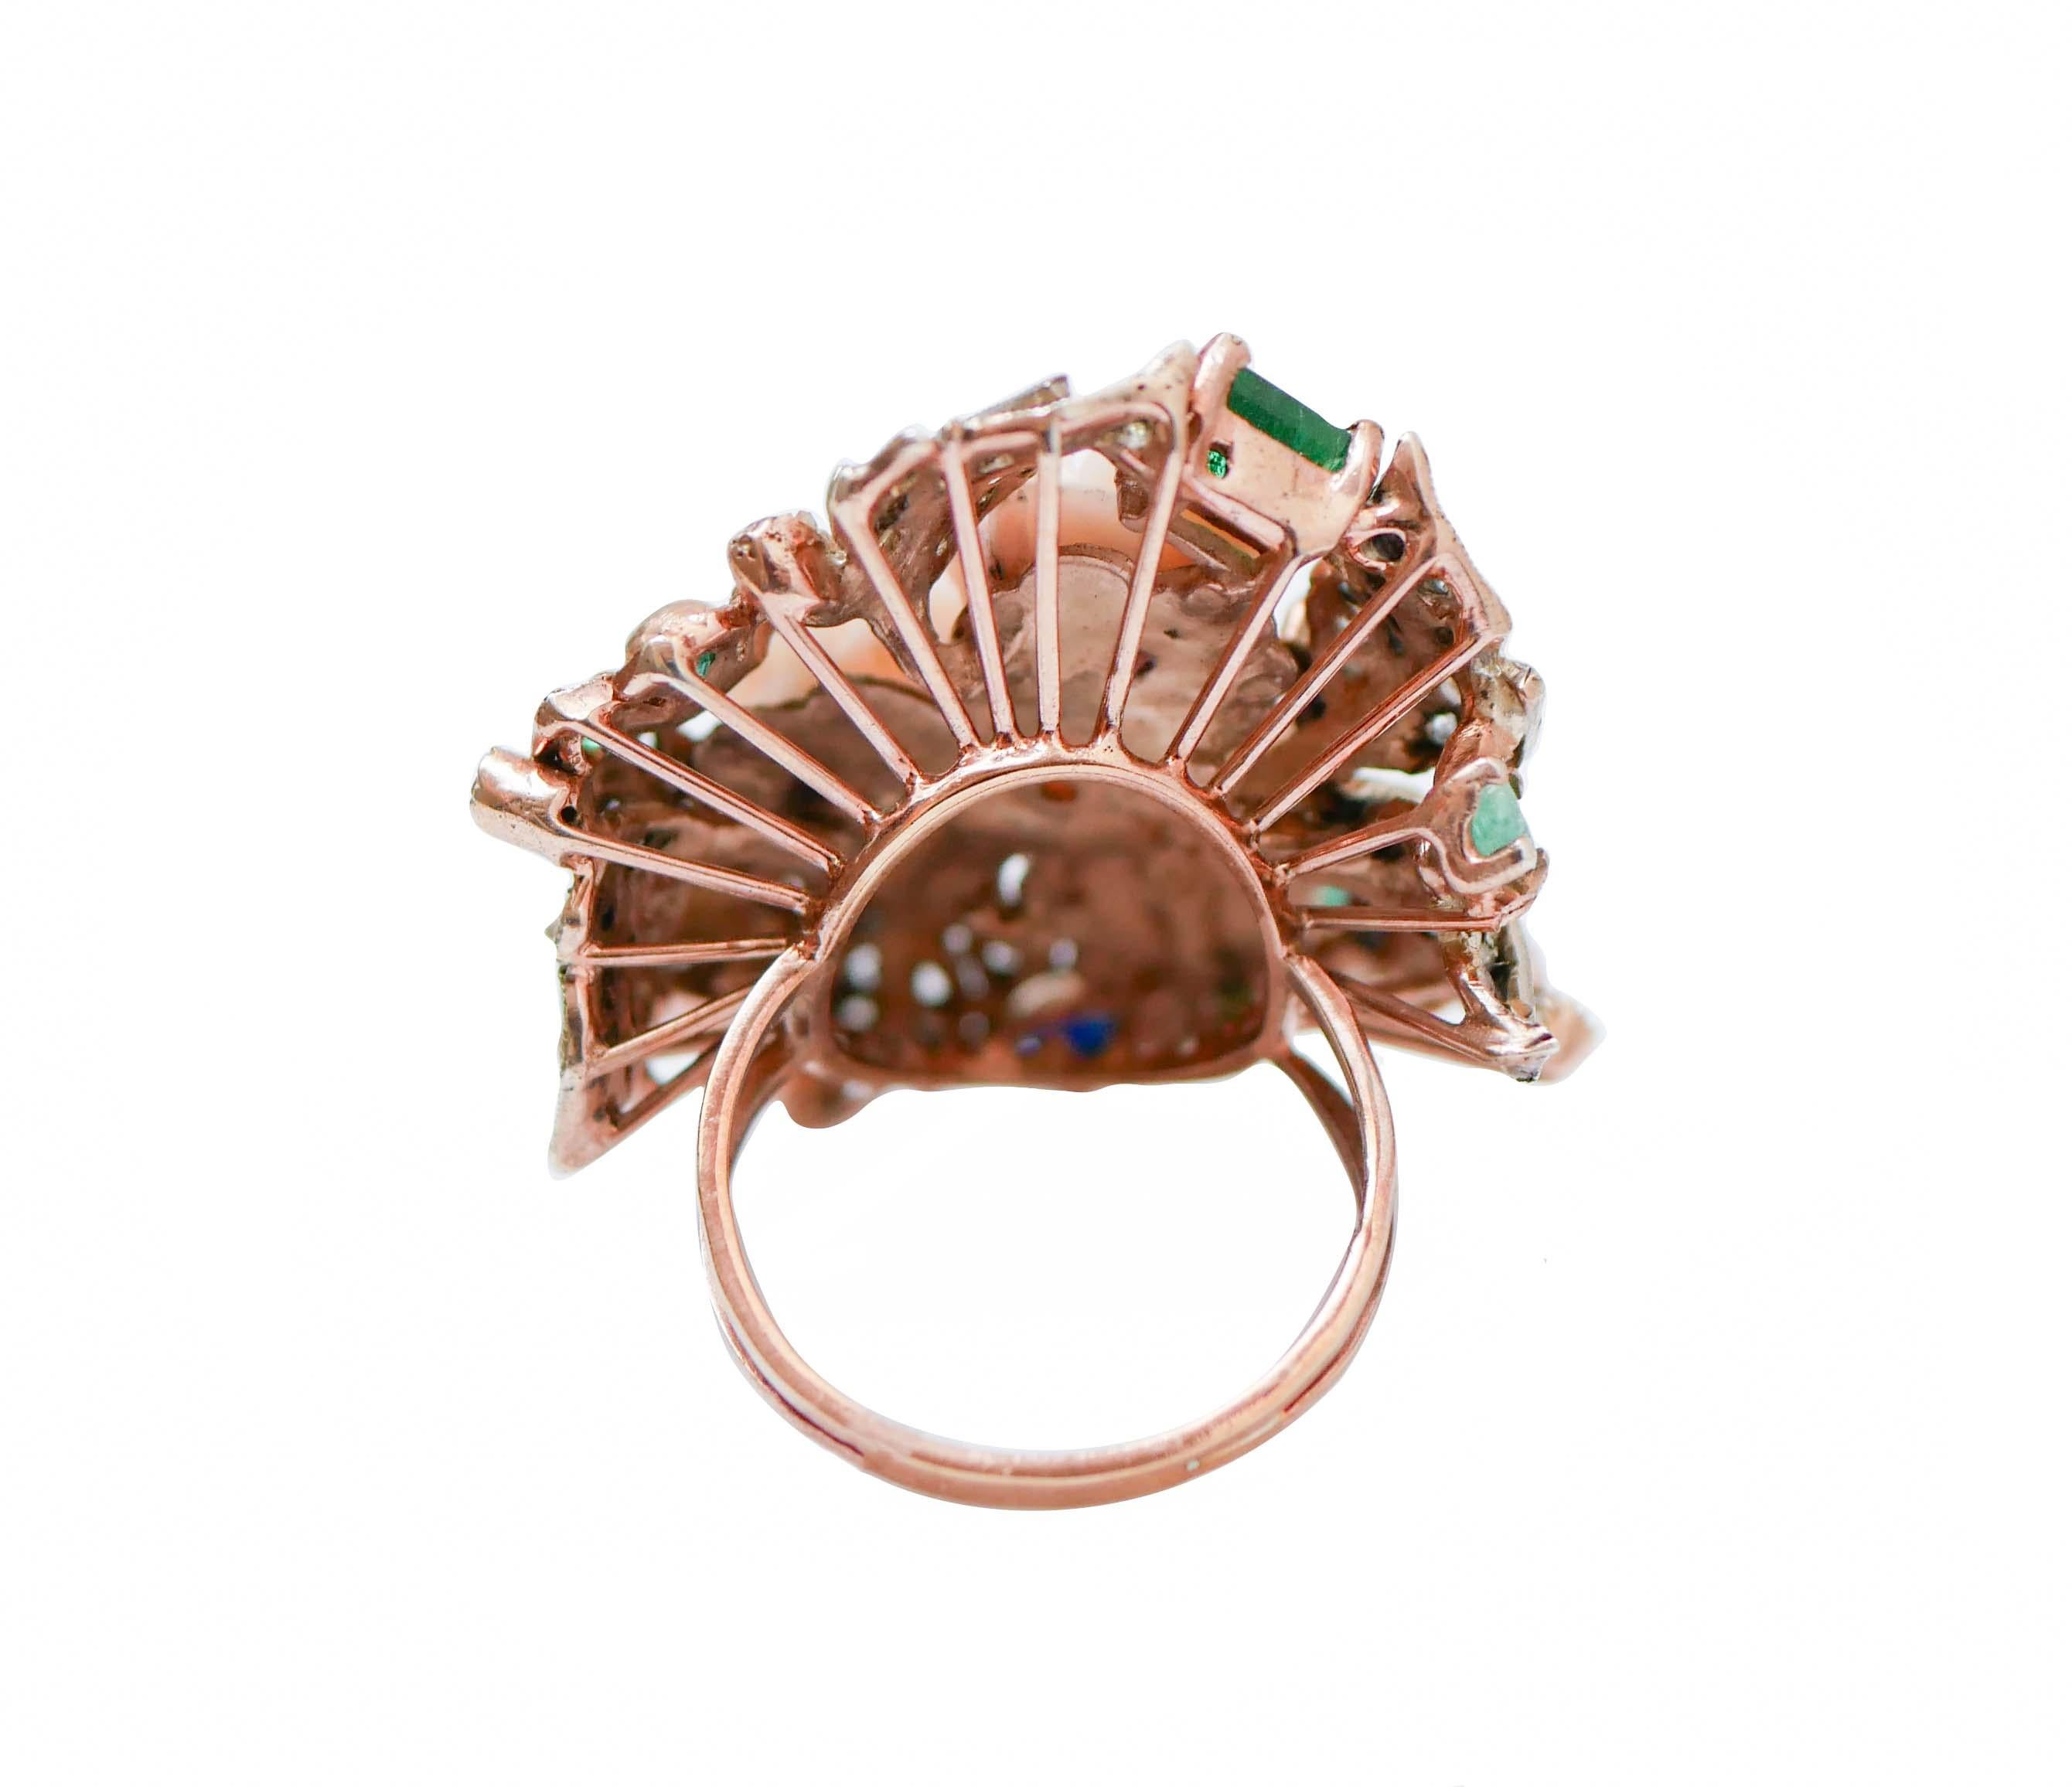 Mixed Cut Coral, Emeralds, Sapphires, Diamonds, Rose Gold and Silver Retrò Ring. For Sale